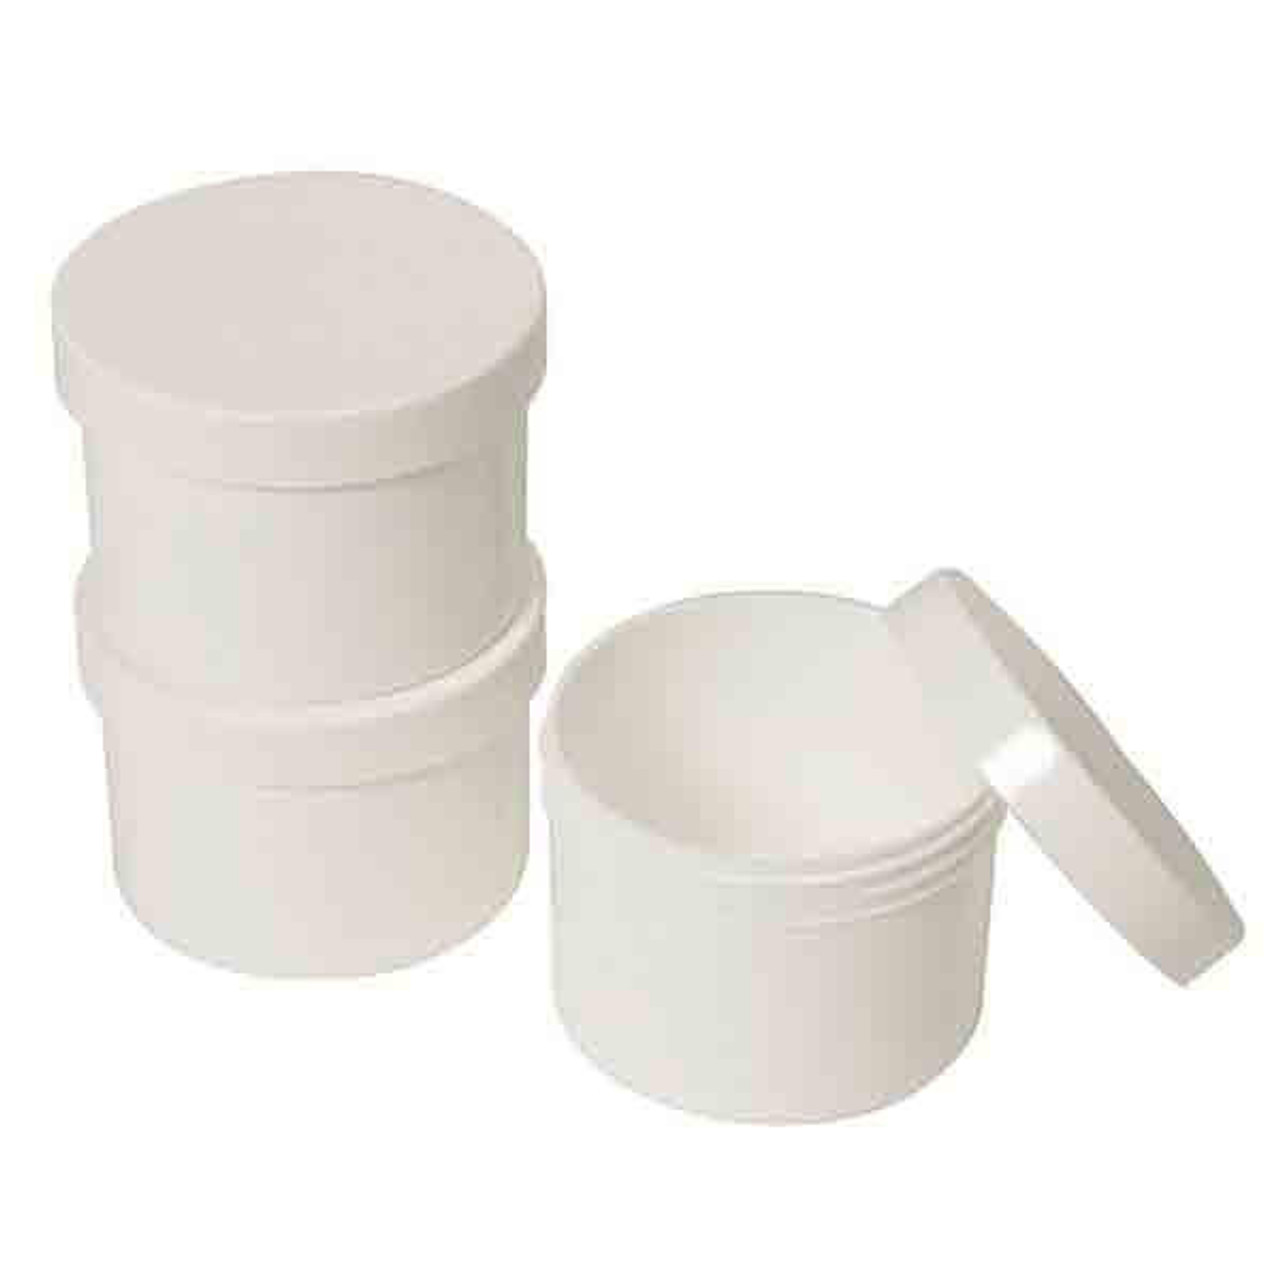 Plastic Round Container with Screwtop Lid